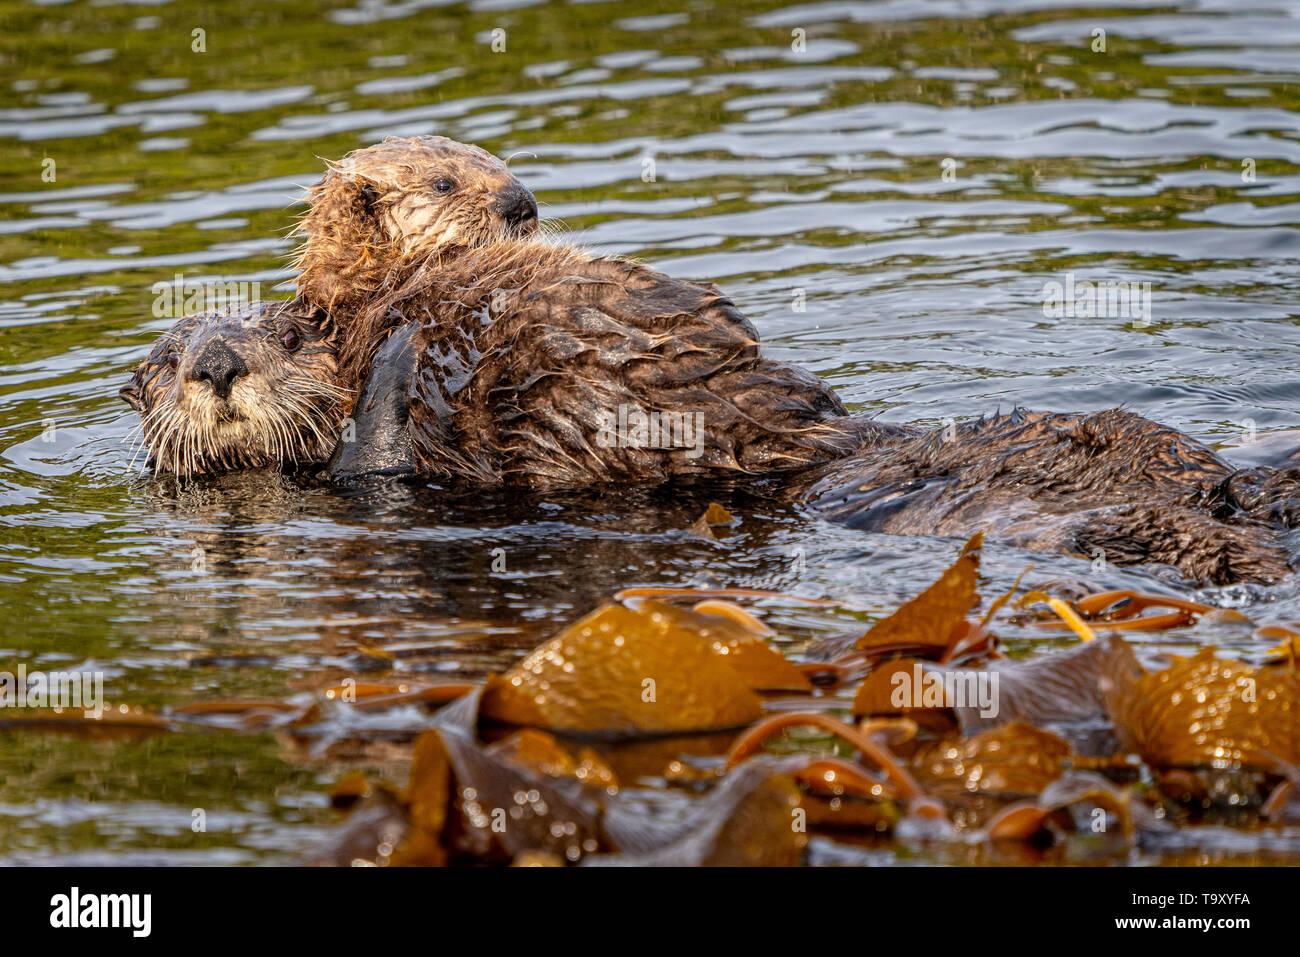 Sea otter (Enhydra lutris) mom with baby a  off the northwestern Vancouver Island shore, Cape Scott, British Columbia, Canada. Stock Photo